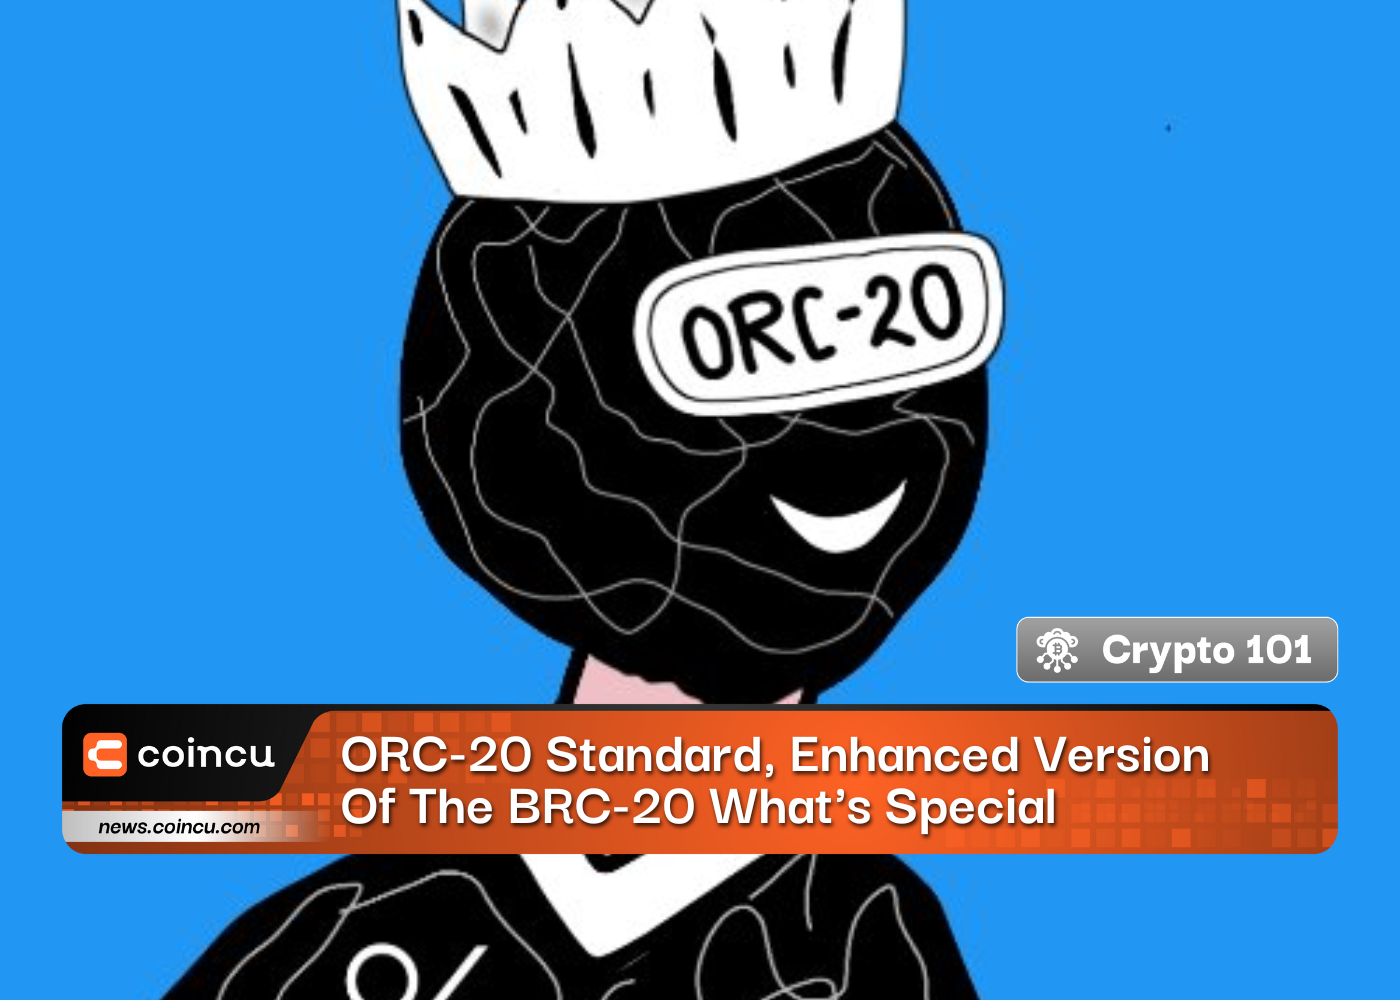 ORC-20 Standard, Enhanced Version Of The BRC-20 What's Special